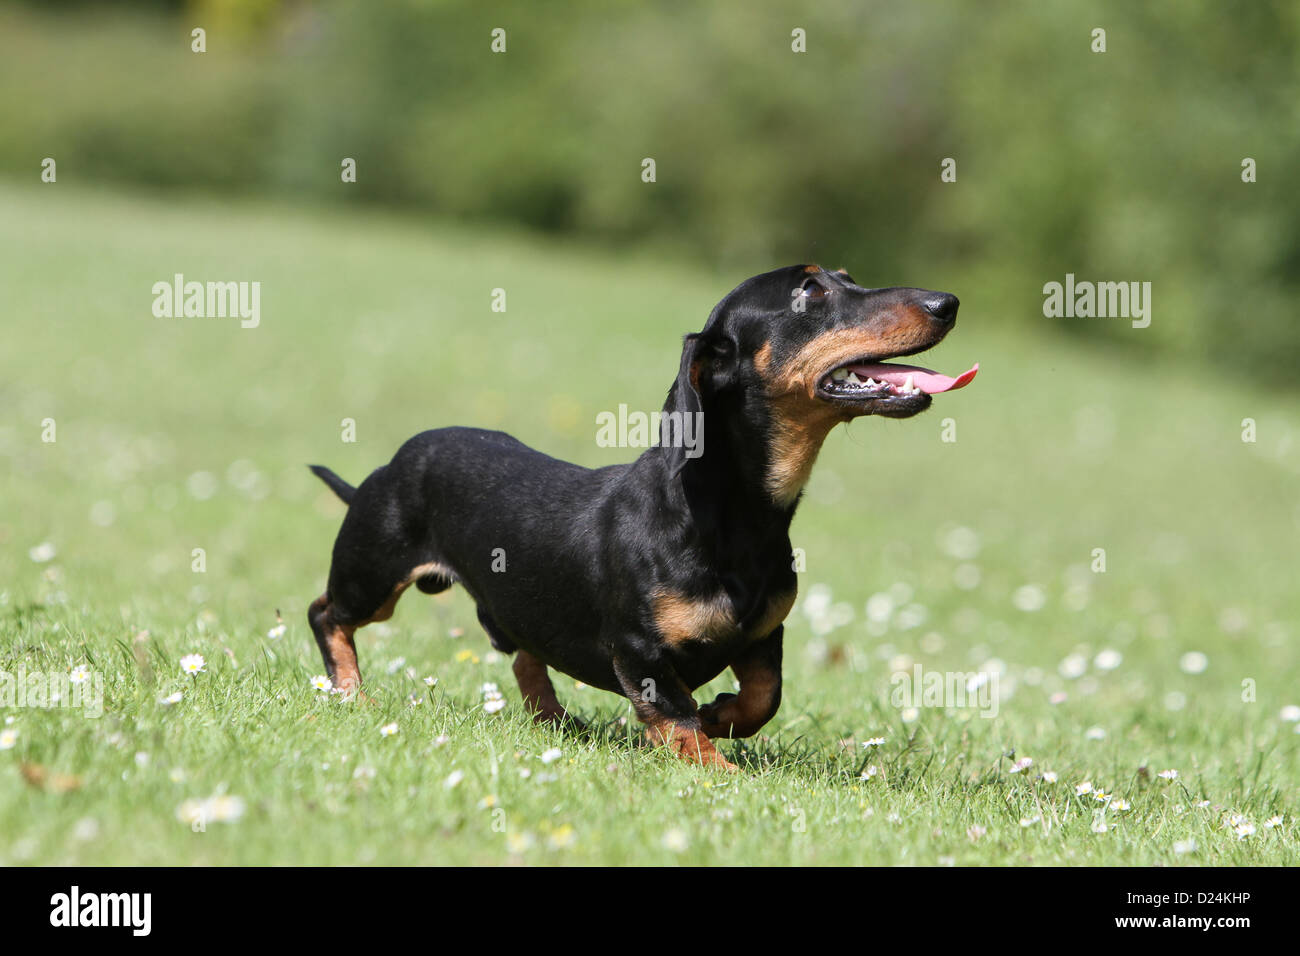 Dog Dachshund /  Dackel / Teckel  shorthaired adult (black and tan) standing in the grass Stock Photo